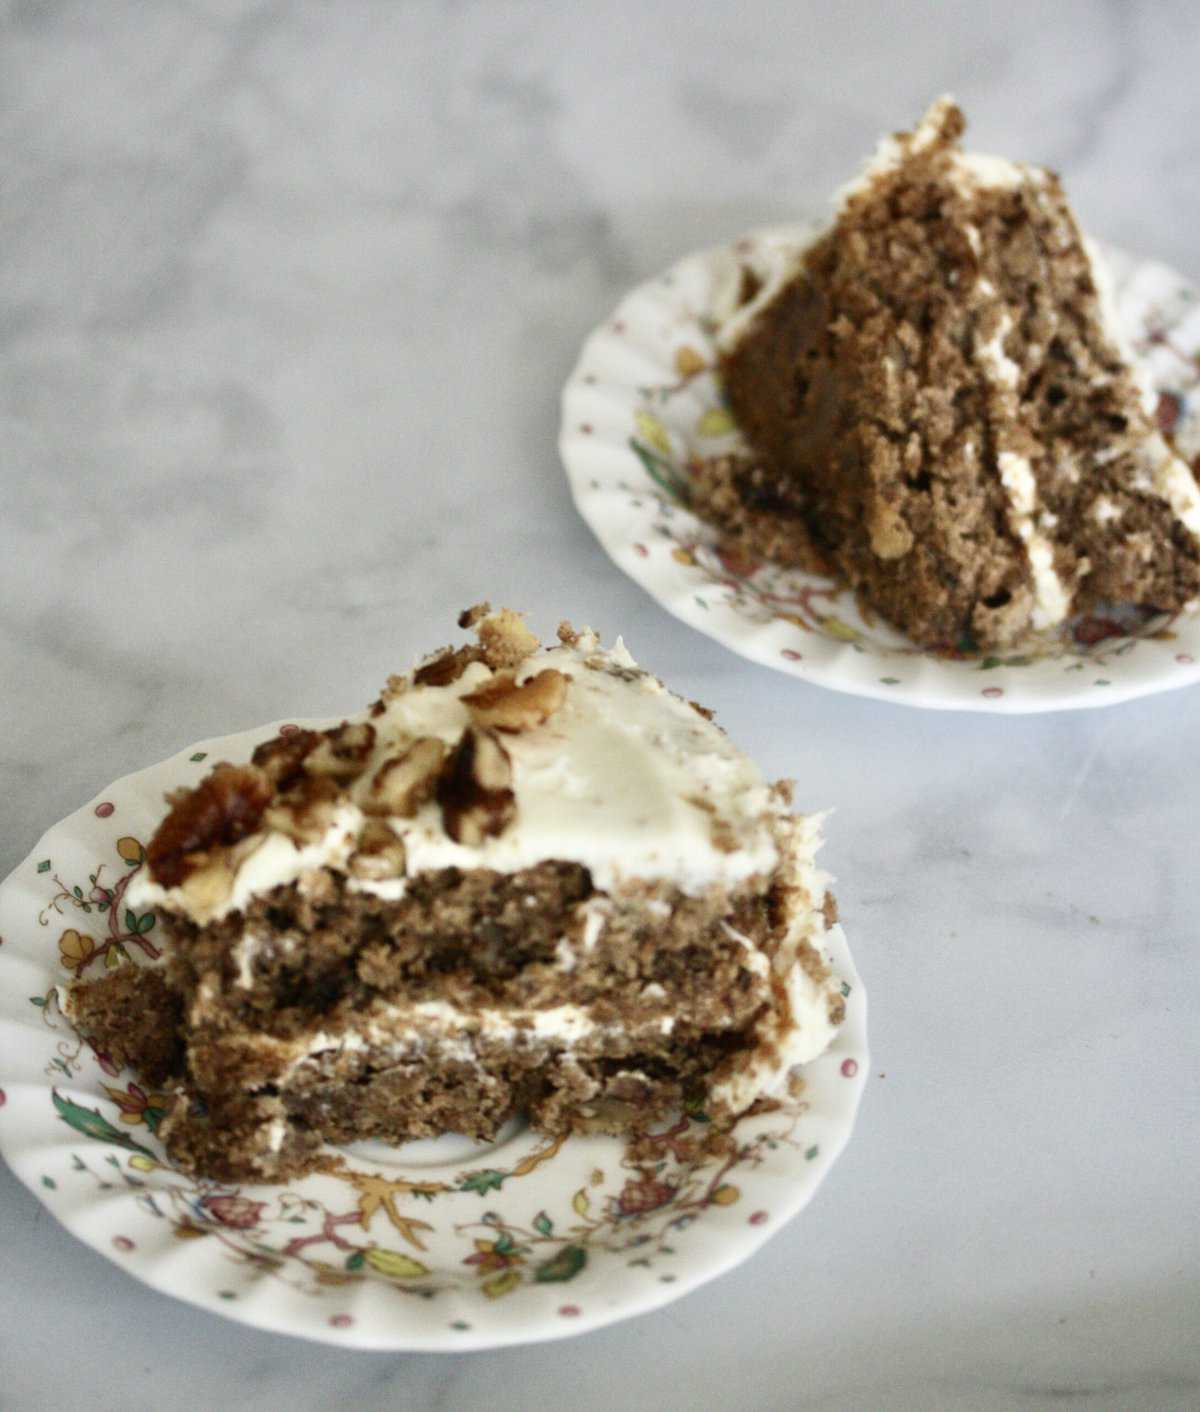 Slices of gluten-free hummingbird cake on a plate.